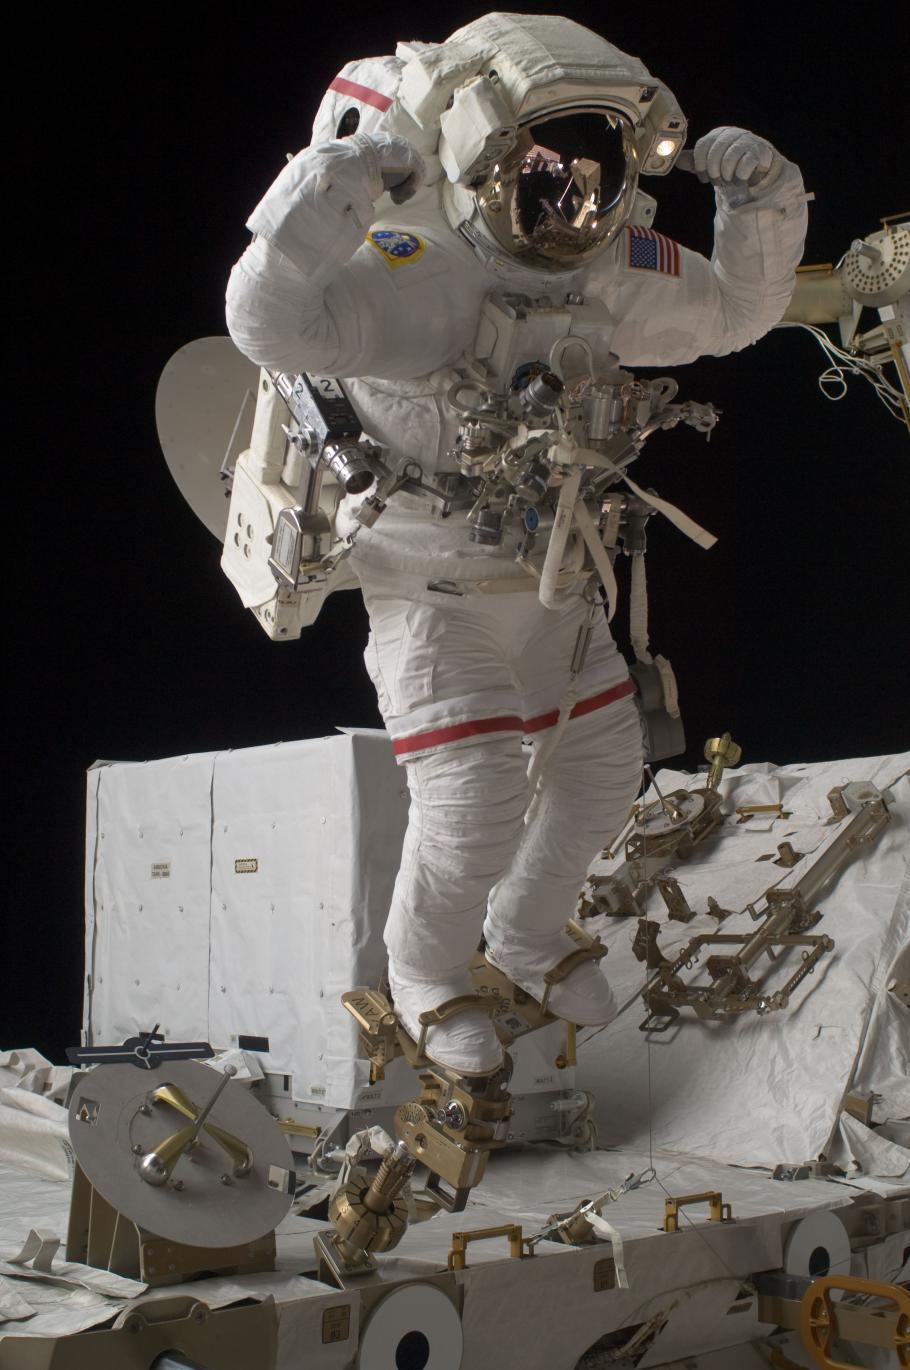 Astronaut working outside the International Space Station